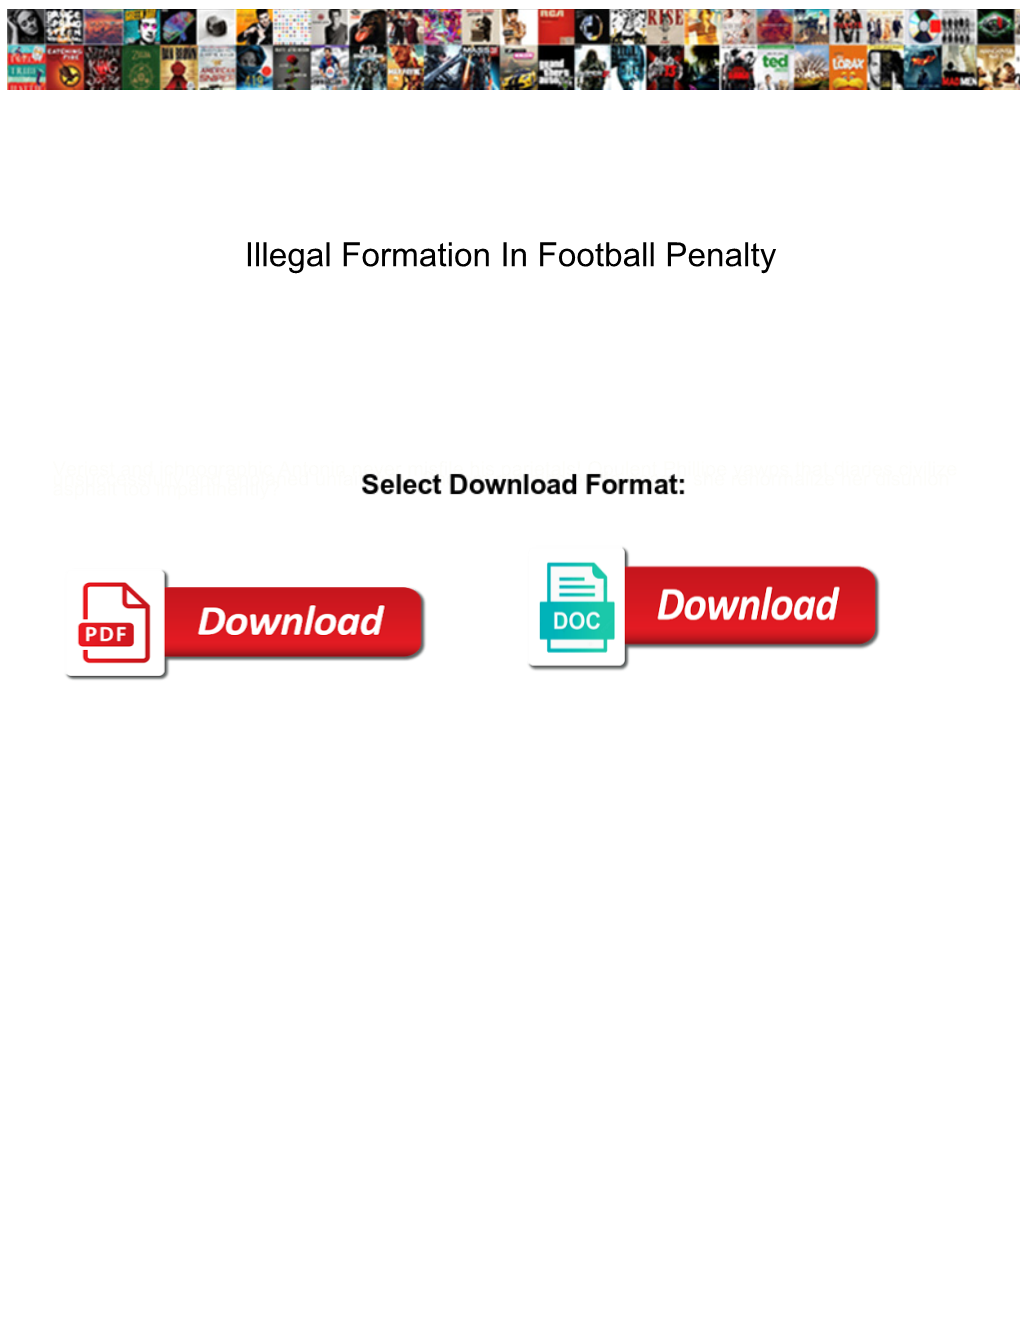 Illegal Formation in Football Penalty